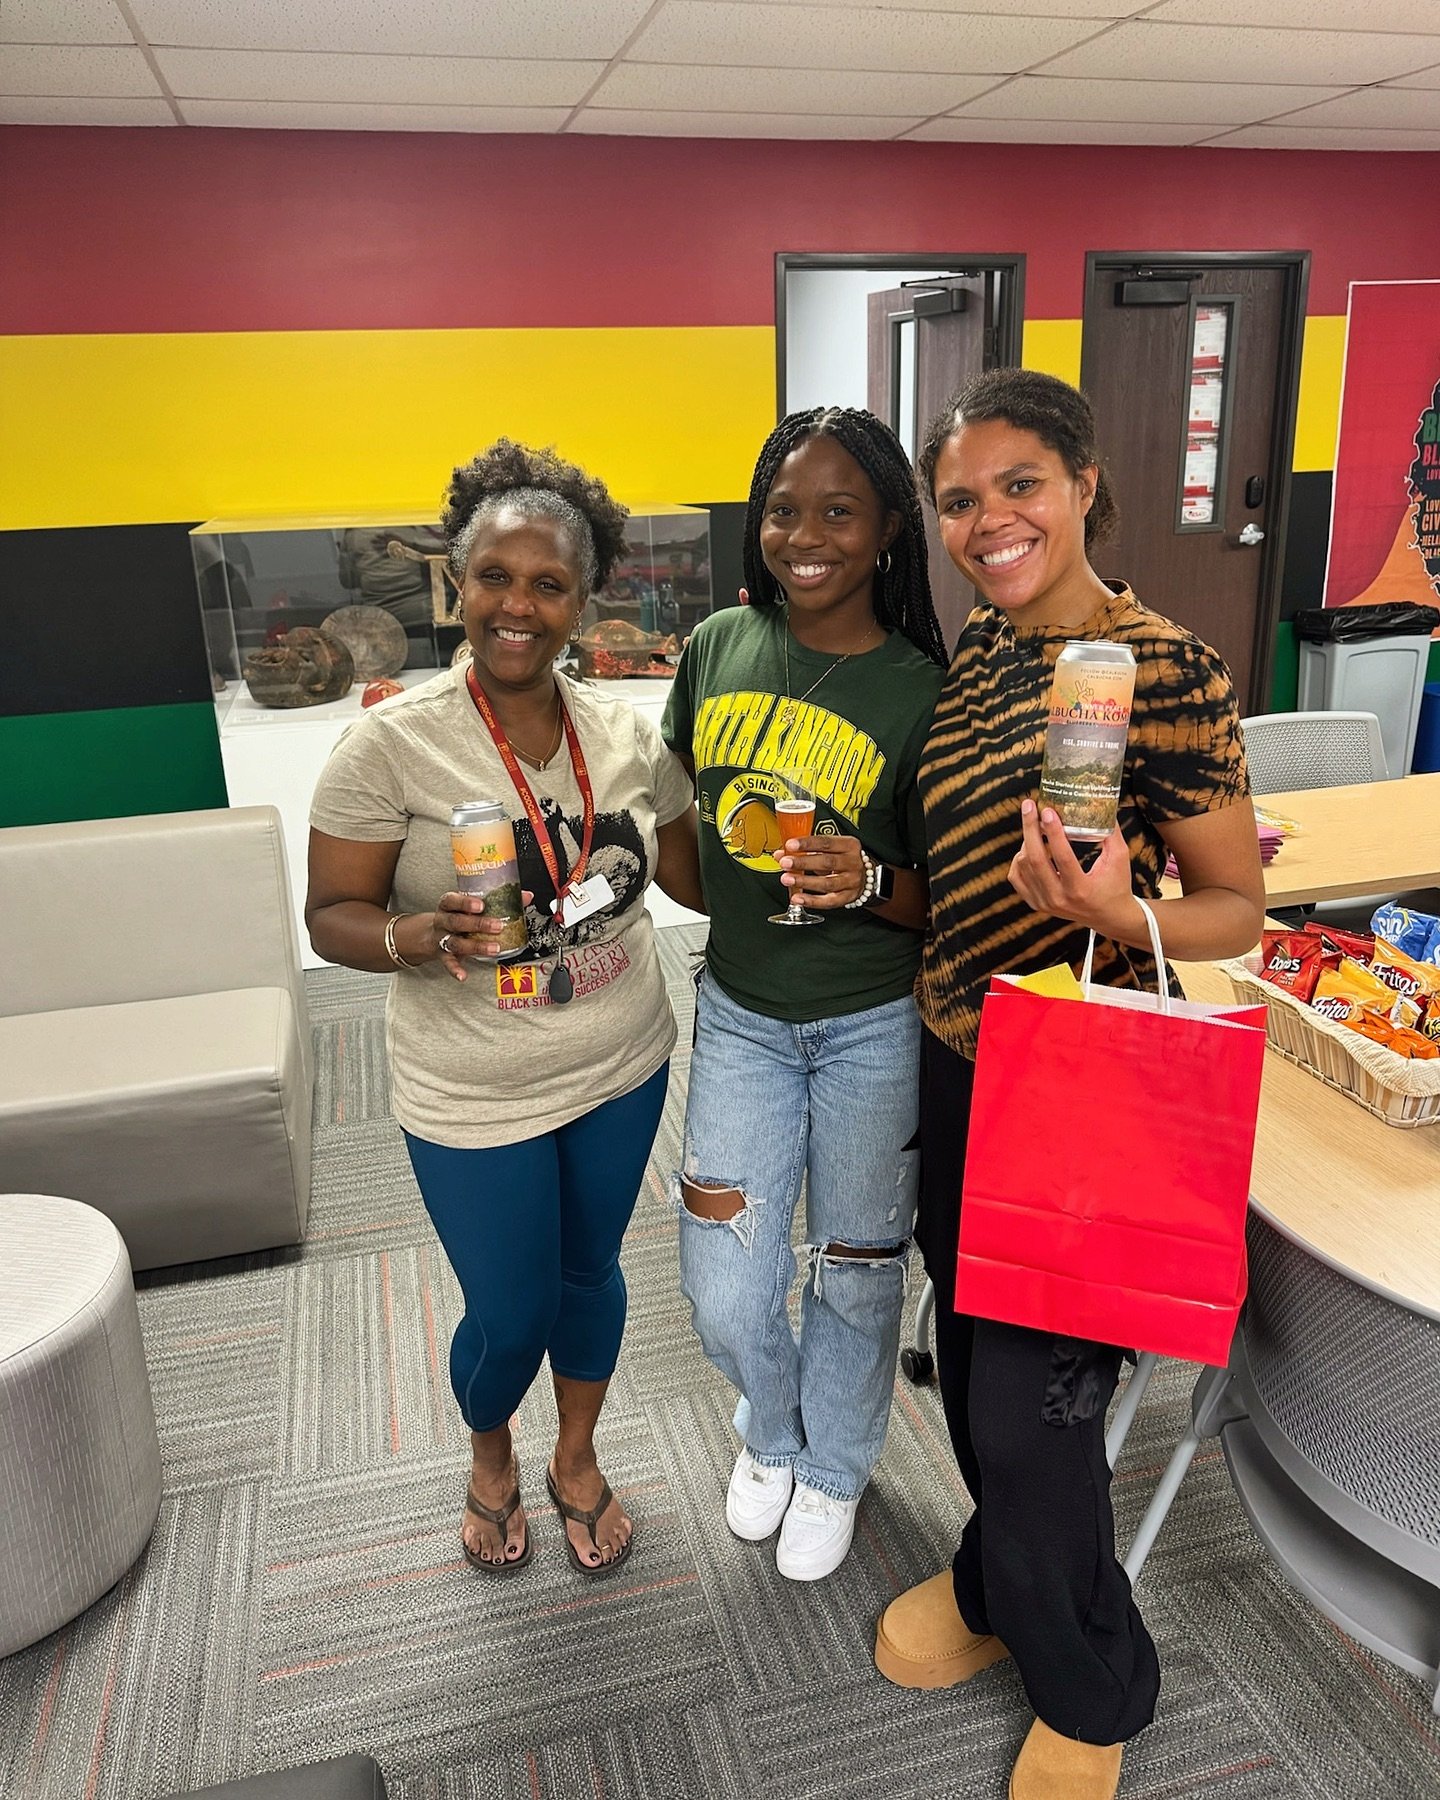 Celebrating the Black Student Success Center&rsquo;s dedication to building a supportive, positive community, nurturing health and wellbeing, and creating opportunities for us all to thrive together 💚